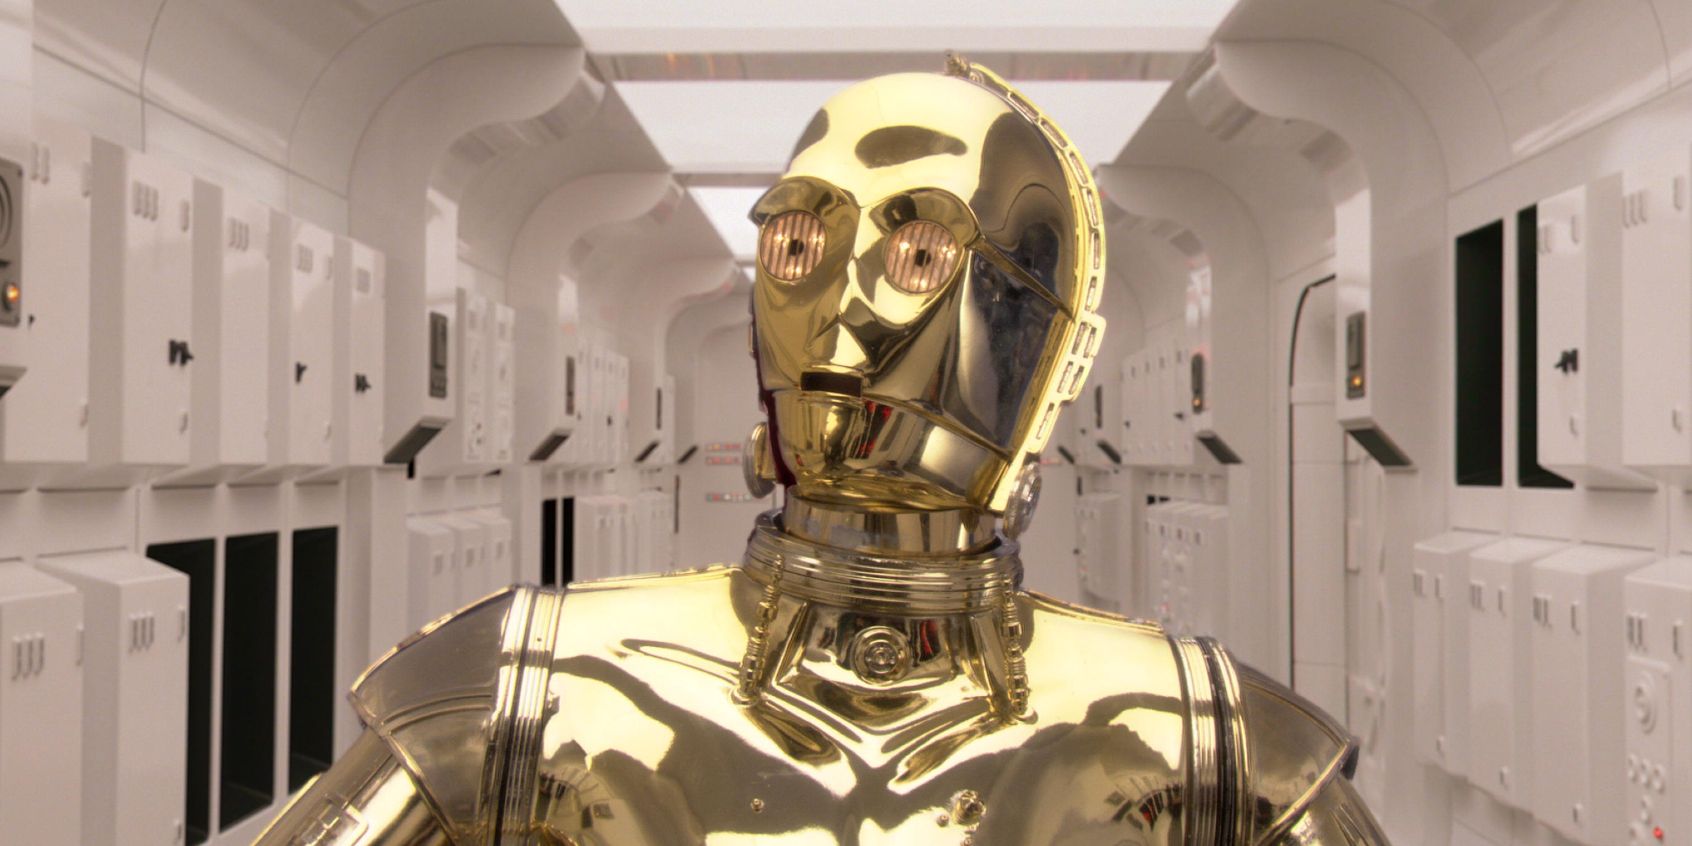 Anthony Daniels as C-3PO in Star Wars: Revenge of the Sith